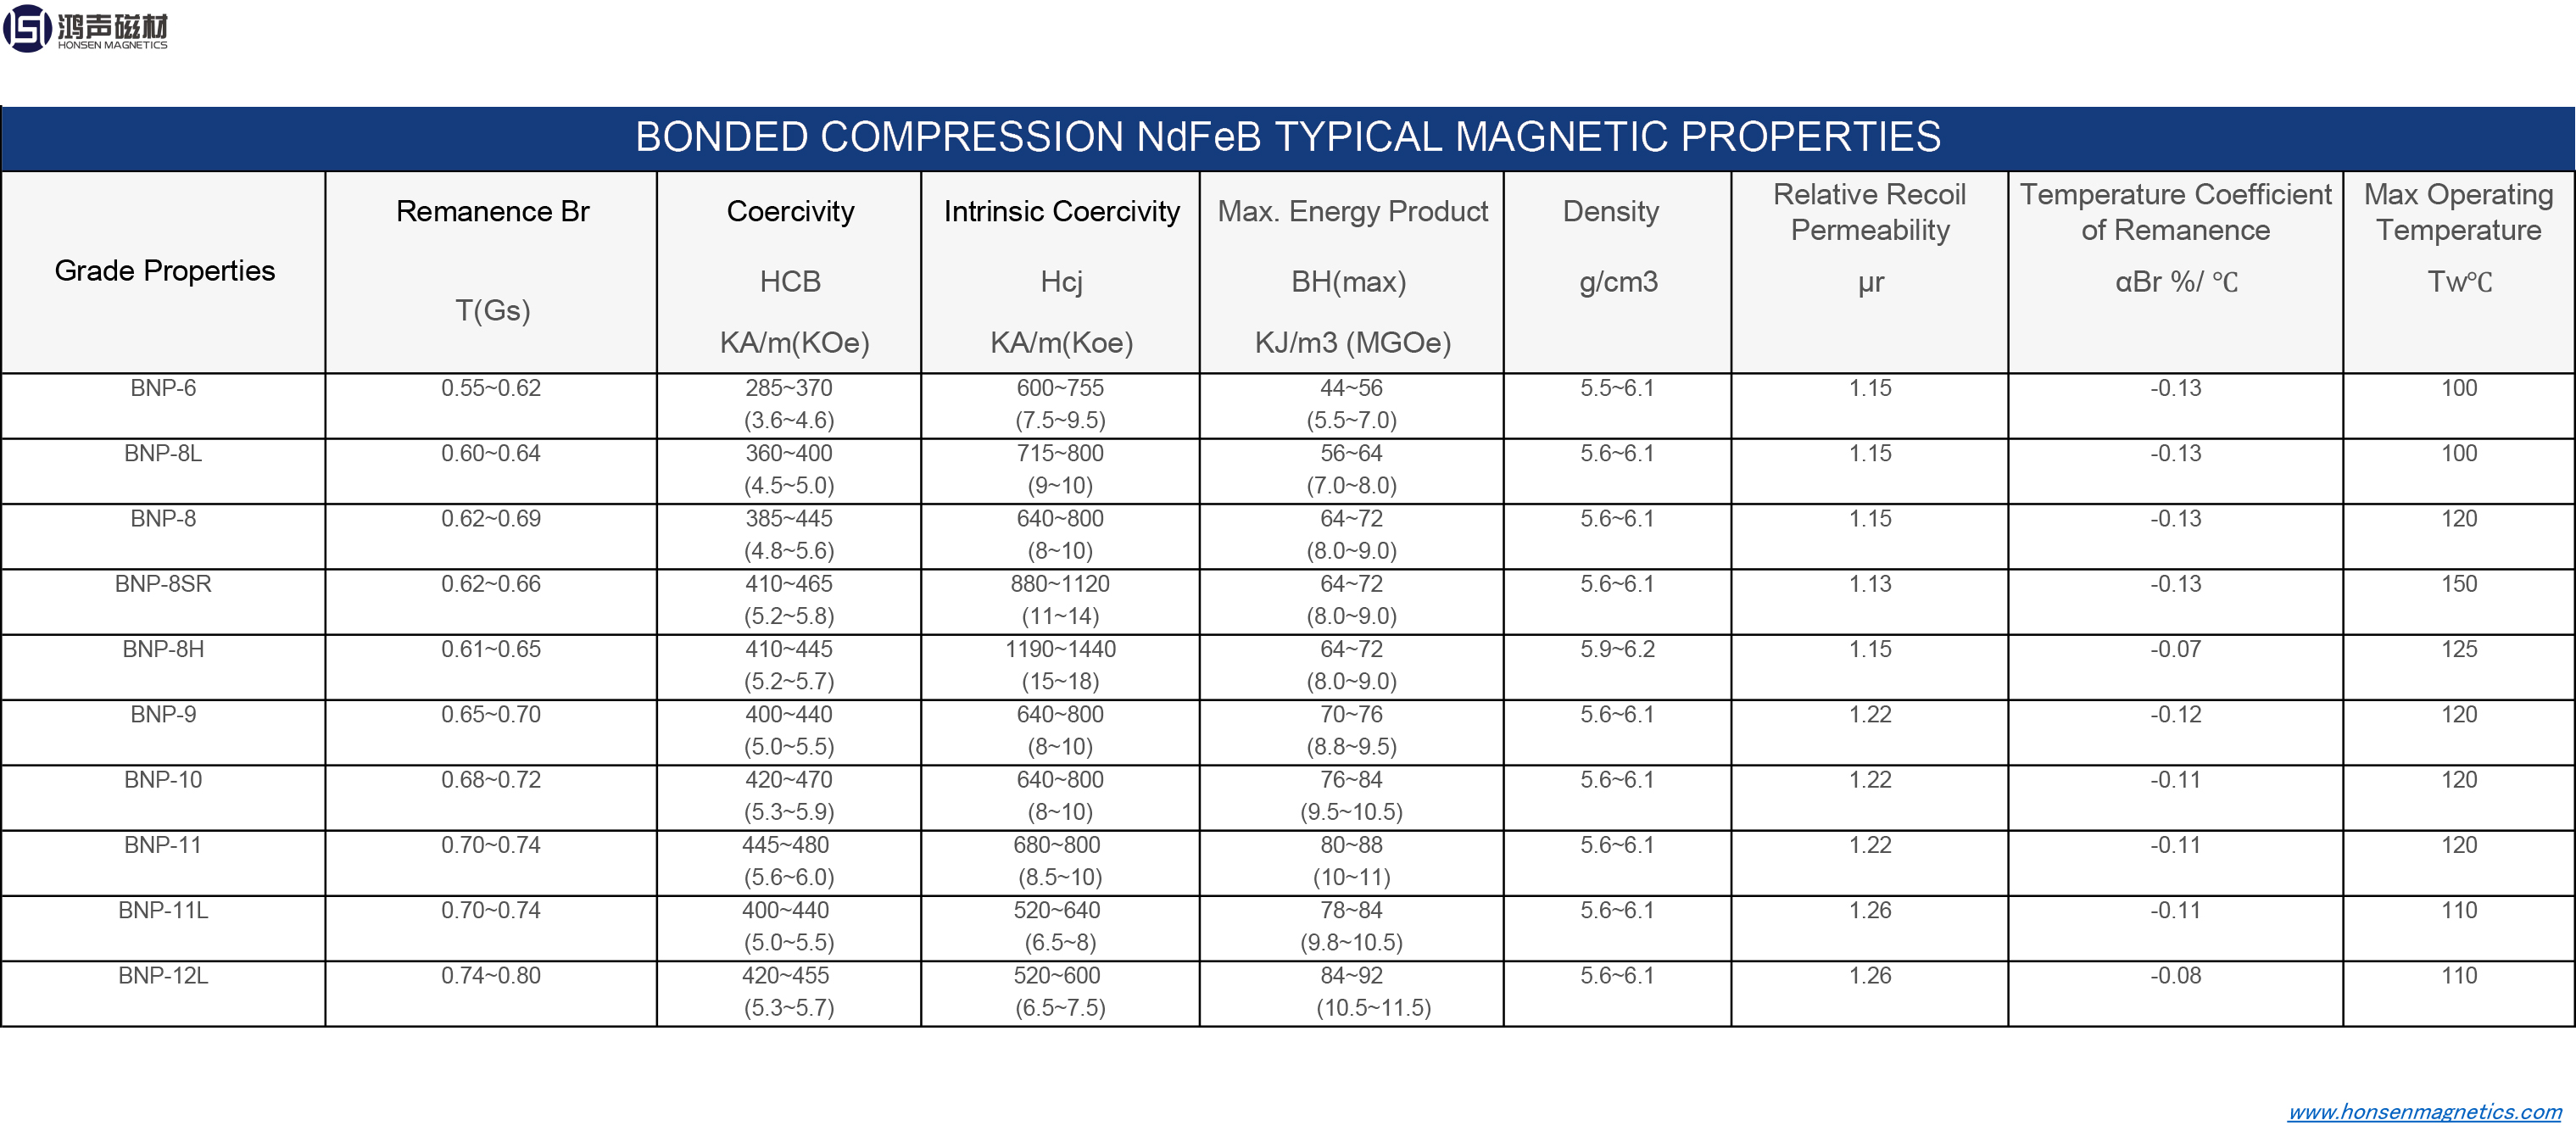 Magnetic Properties of Bonded Compression NdFeB Magnets